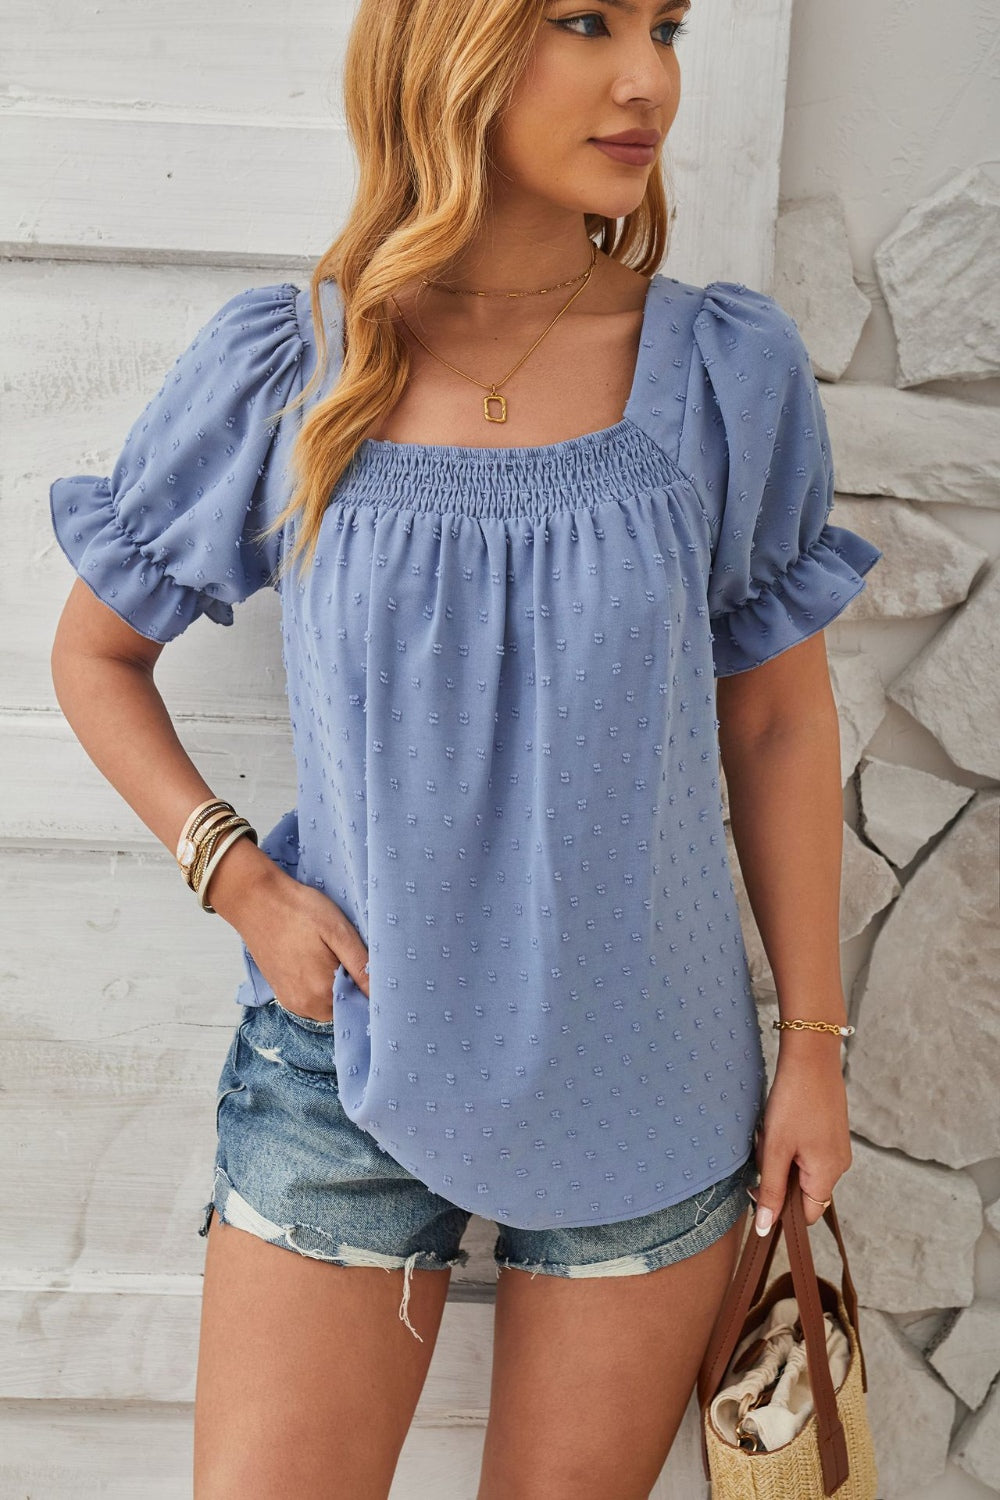 Swiss Dot Smocked Square Neck Short Sleeve Top (5 Colors) Shirts & Tops Krazy Heart Designs Boutique Misty  Blue S 